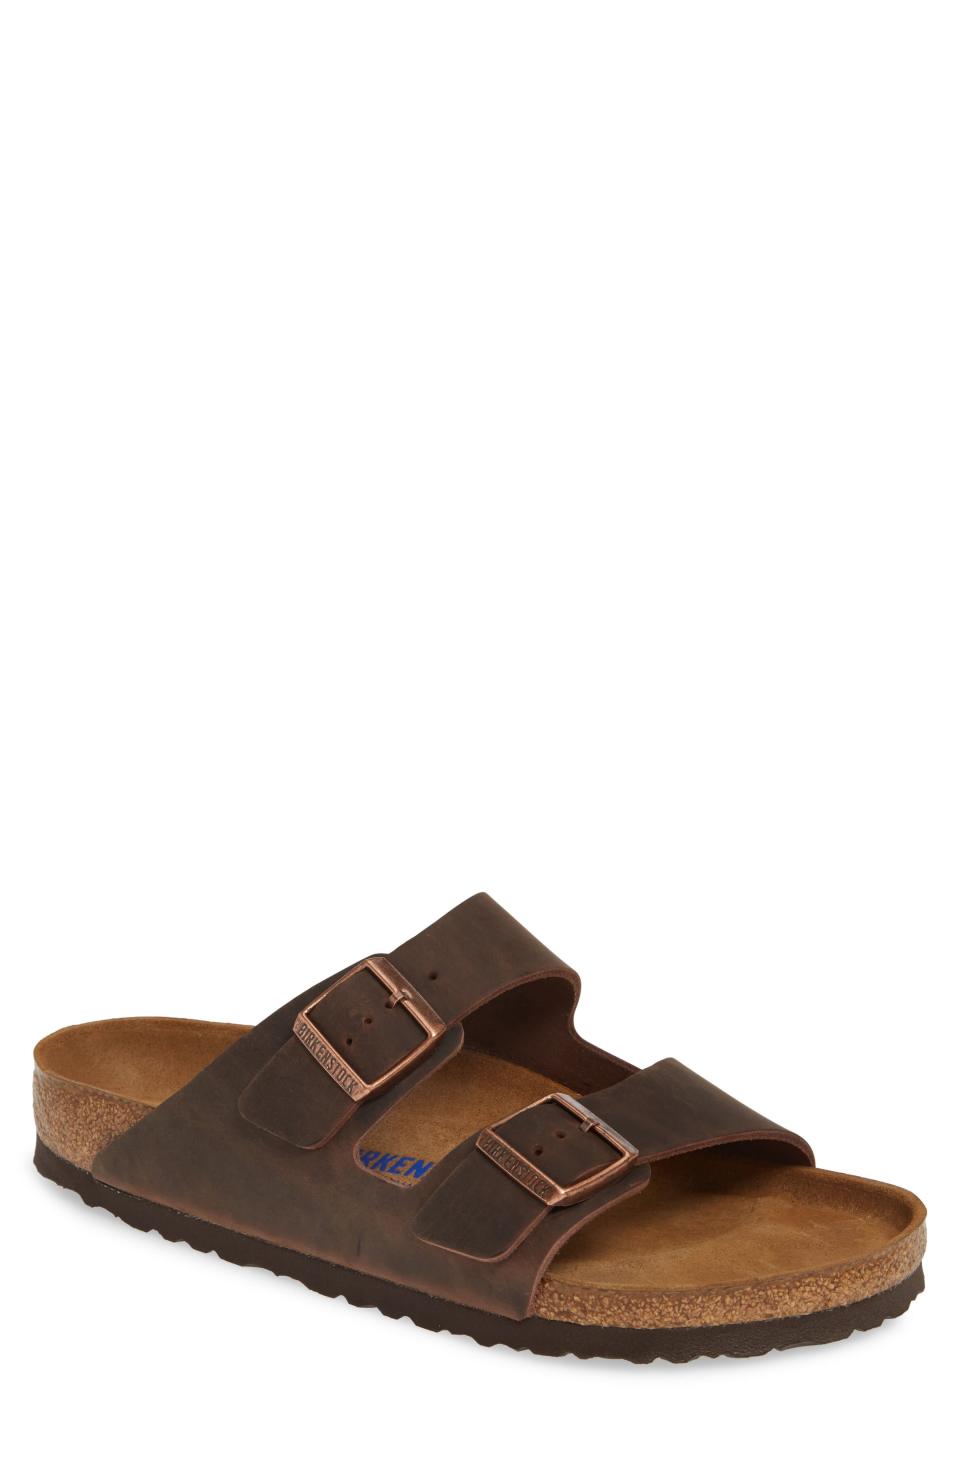 <p><strong>BIRKENSTOCK</strong></p><p>nordstrom.com</p><p><strong>$134.95</strong></p><p><a href="https://go.redirectingat.com?id=74968X1596630&url=https%3A%2F%2Fwww.nordstrom.com%2Fs%2Fbirkenstock-arizona-soft-slide-sandal-men%2F3409982&sref=https%3A%2F%2Fwww.thepioneerwoman.com%2Fholidays-celebrations%2Fgifts%2Fg32883915%2Flast-minute-fathers-day-gifts%2F" rel="nofollow noopener" target="_blank" data-ylk="slk:Shop Now" class="link ">Shop Now</a></p><p>There's a reason Birkenstocks have always been an iconic shoe. This version features a shock-absorbing footbed, foam cushioning, and the signature adjustable straps.</p>